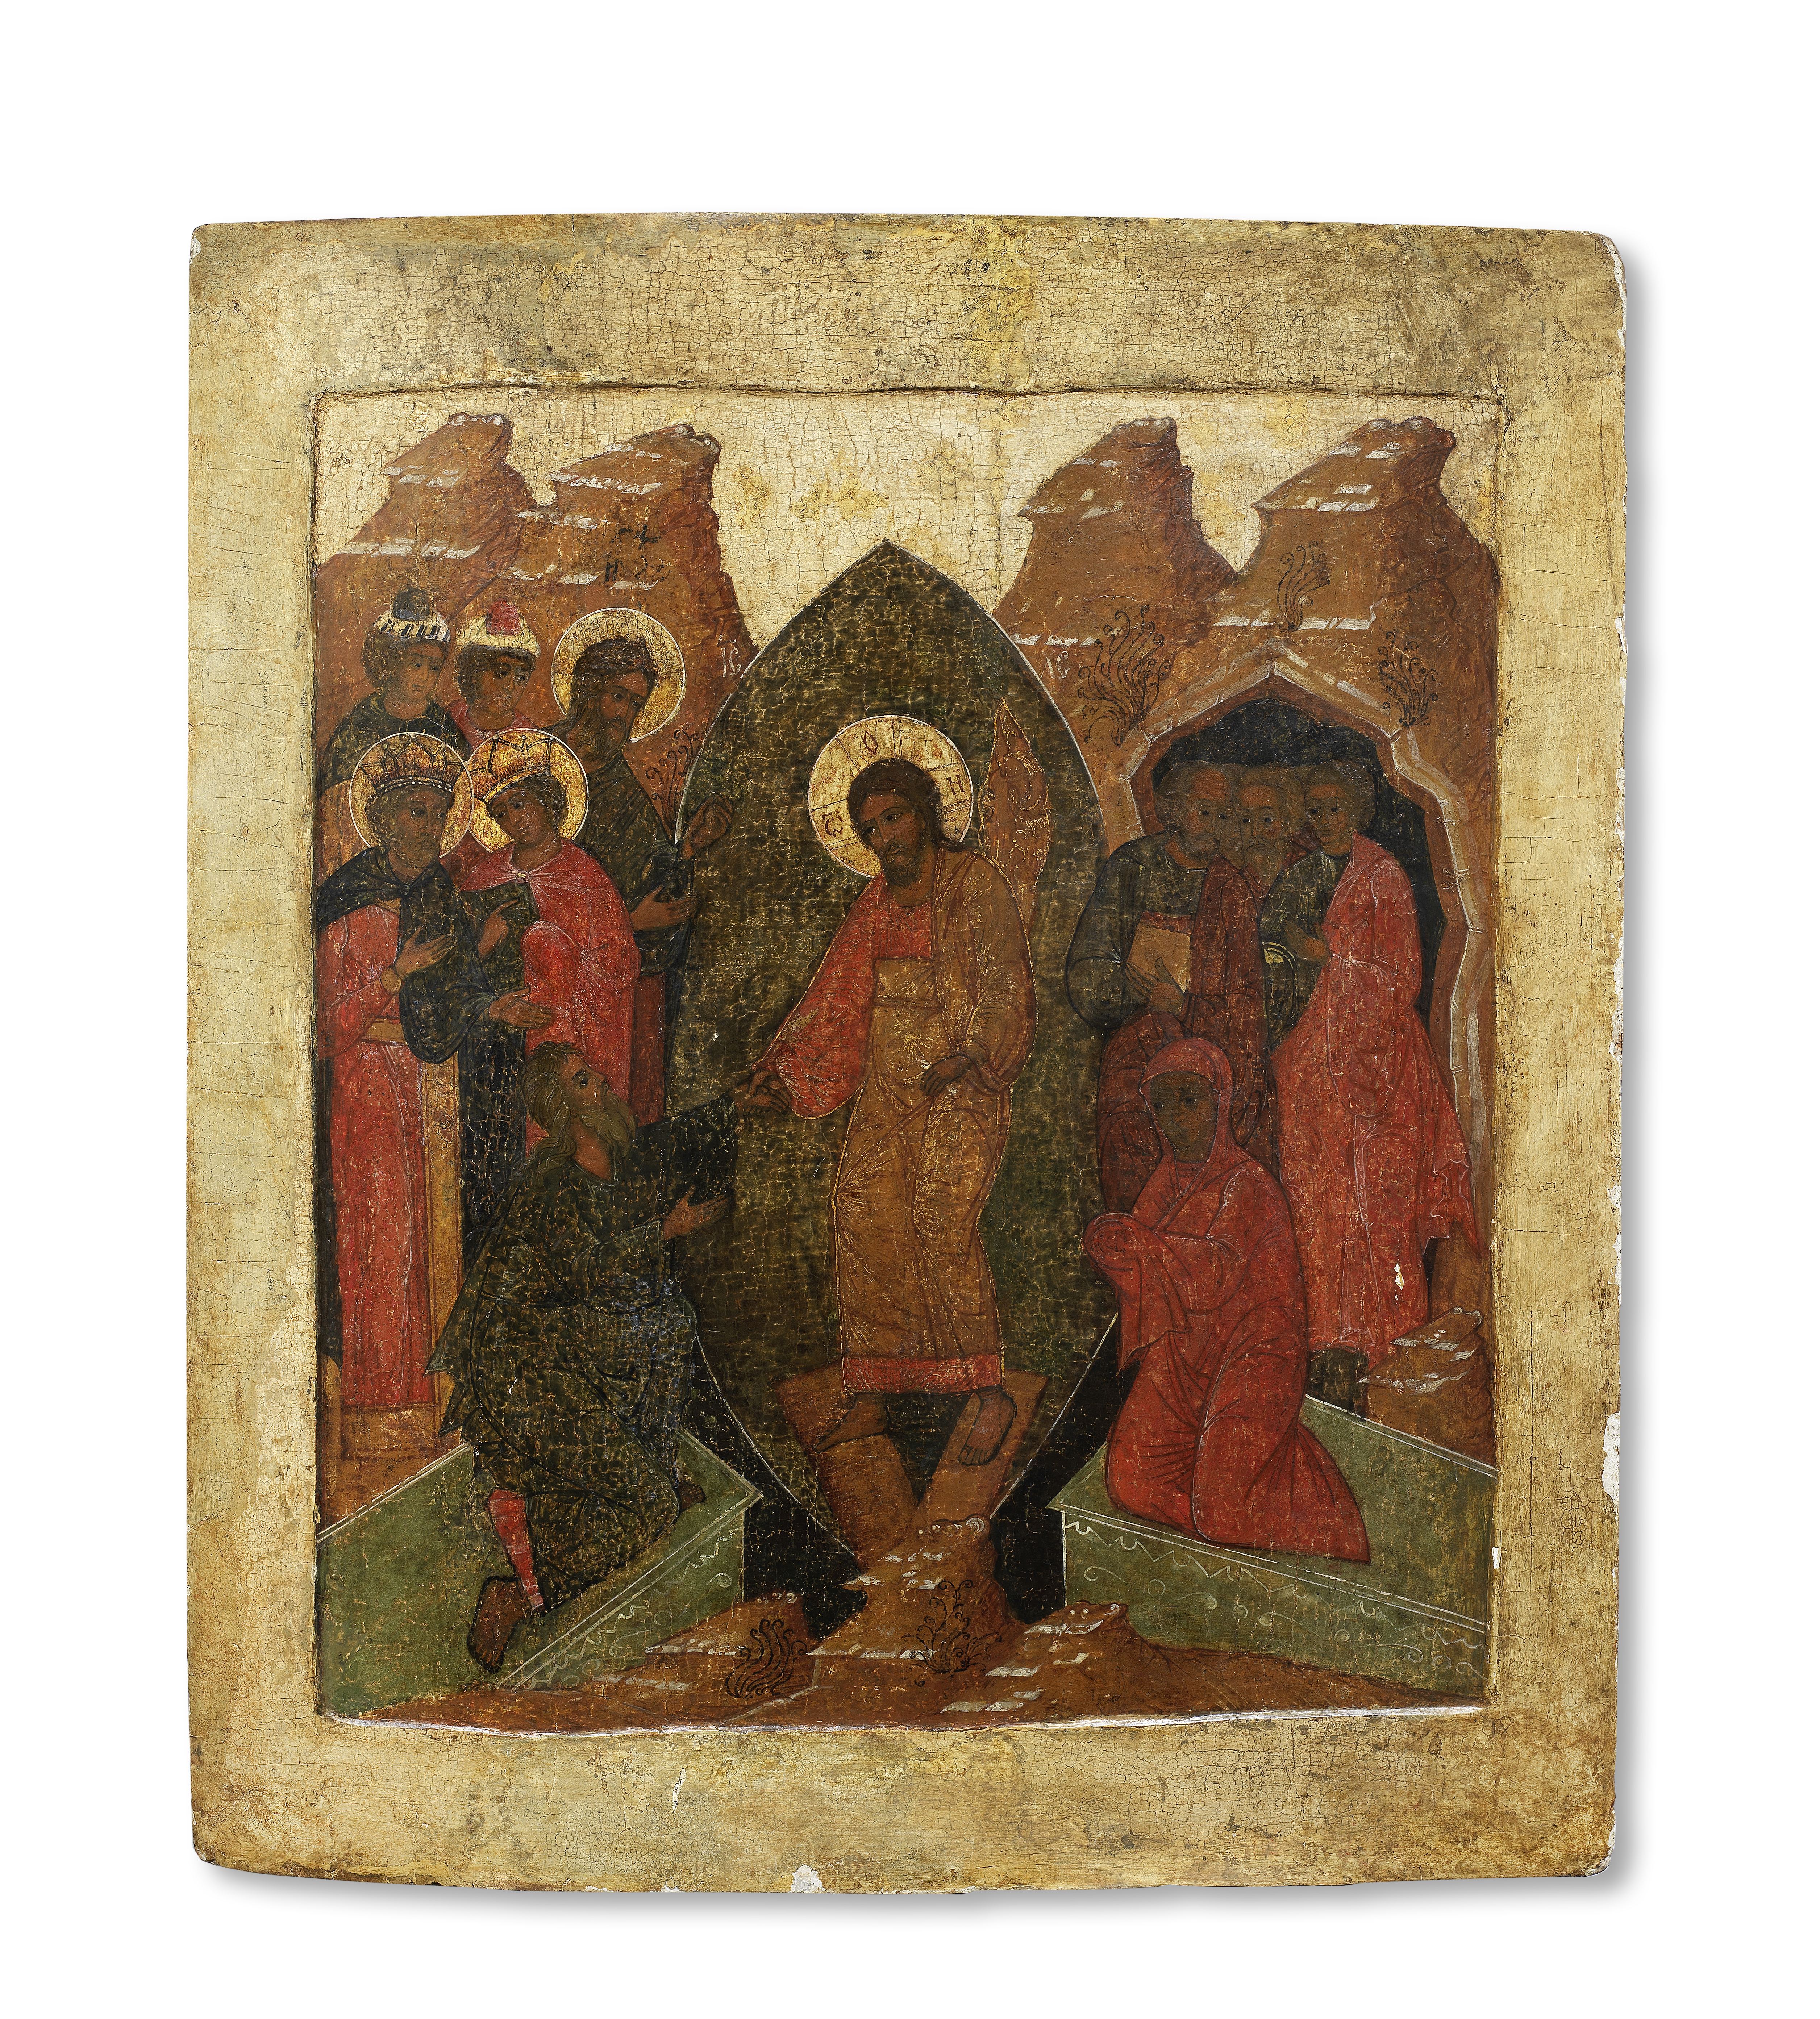 The Resurrection and Descent into HellRussia, late 16th century